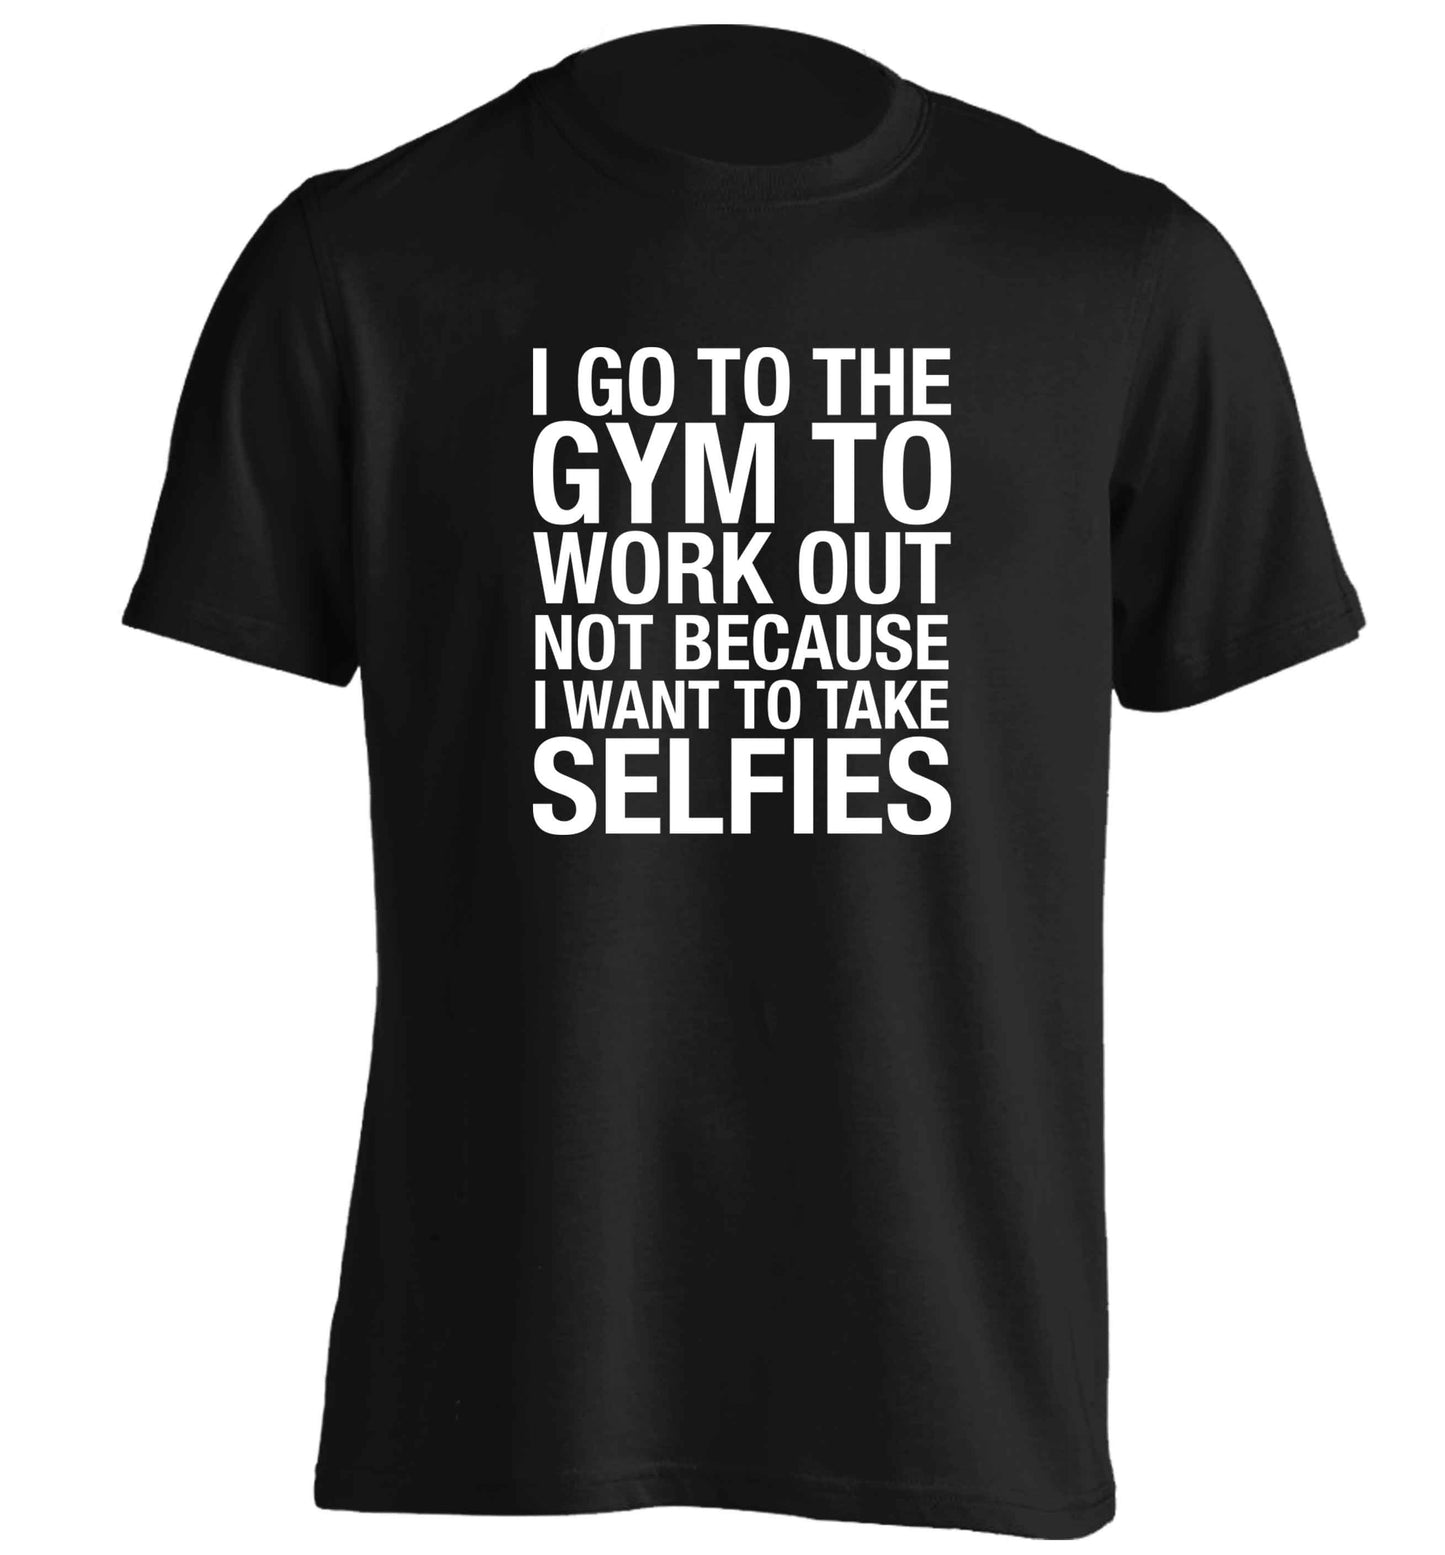 I go to the gym to workout not to take selfies adults unisex black Tshirt 2XL